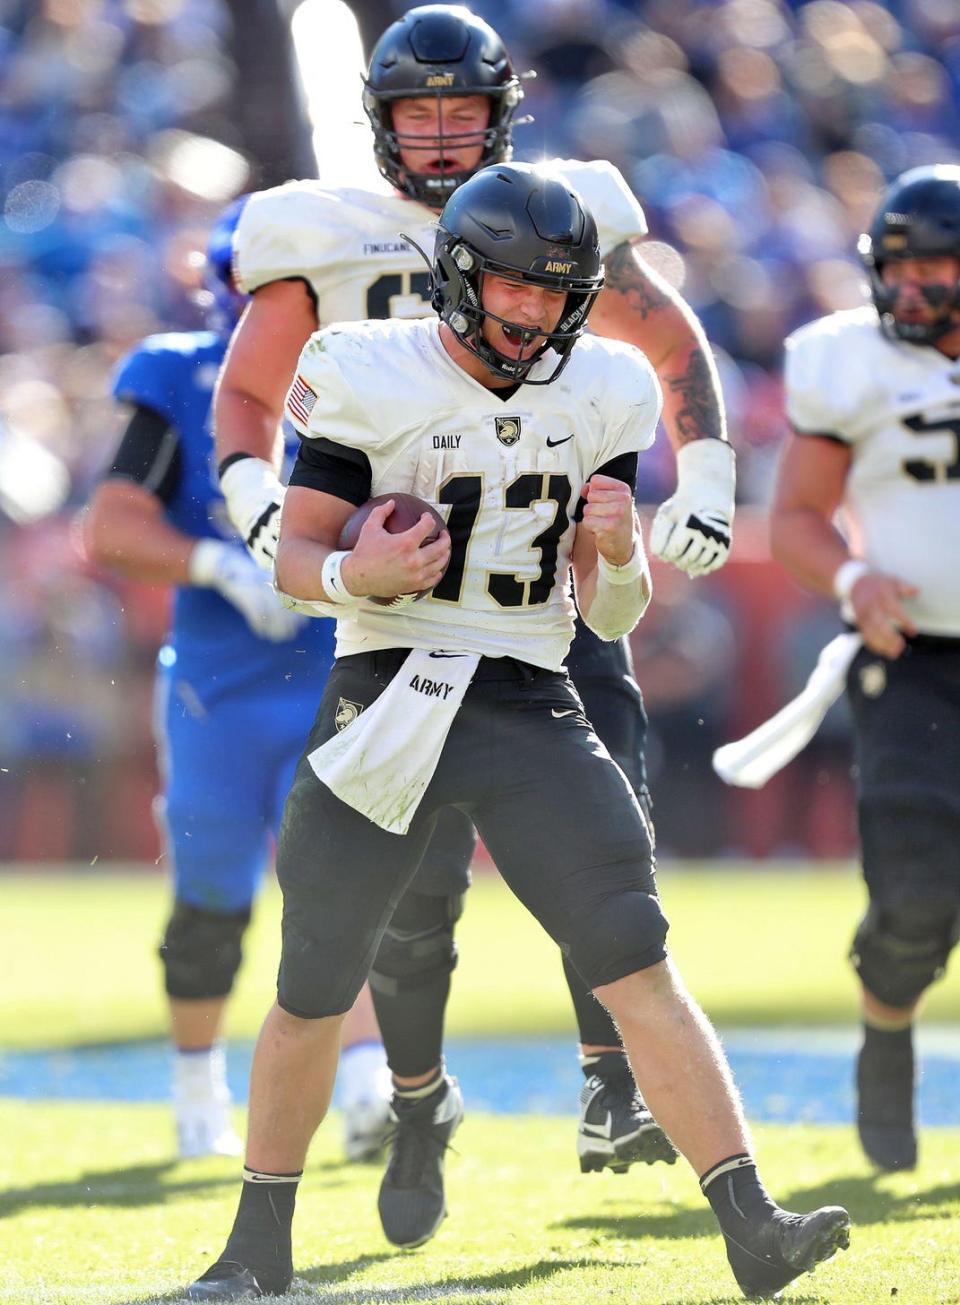 Nov 4, 2023; Denver, Colorado, USA; Army Black Knights quarterback Bryson Daily (13) celebrates after picking up a first down against the Air Force Falcons during the second half at Empower Field at Mile High. Mandatory Credit: Danny Wild-USA TODAY Sports